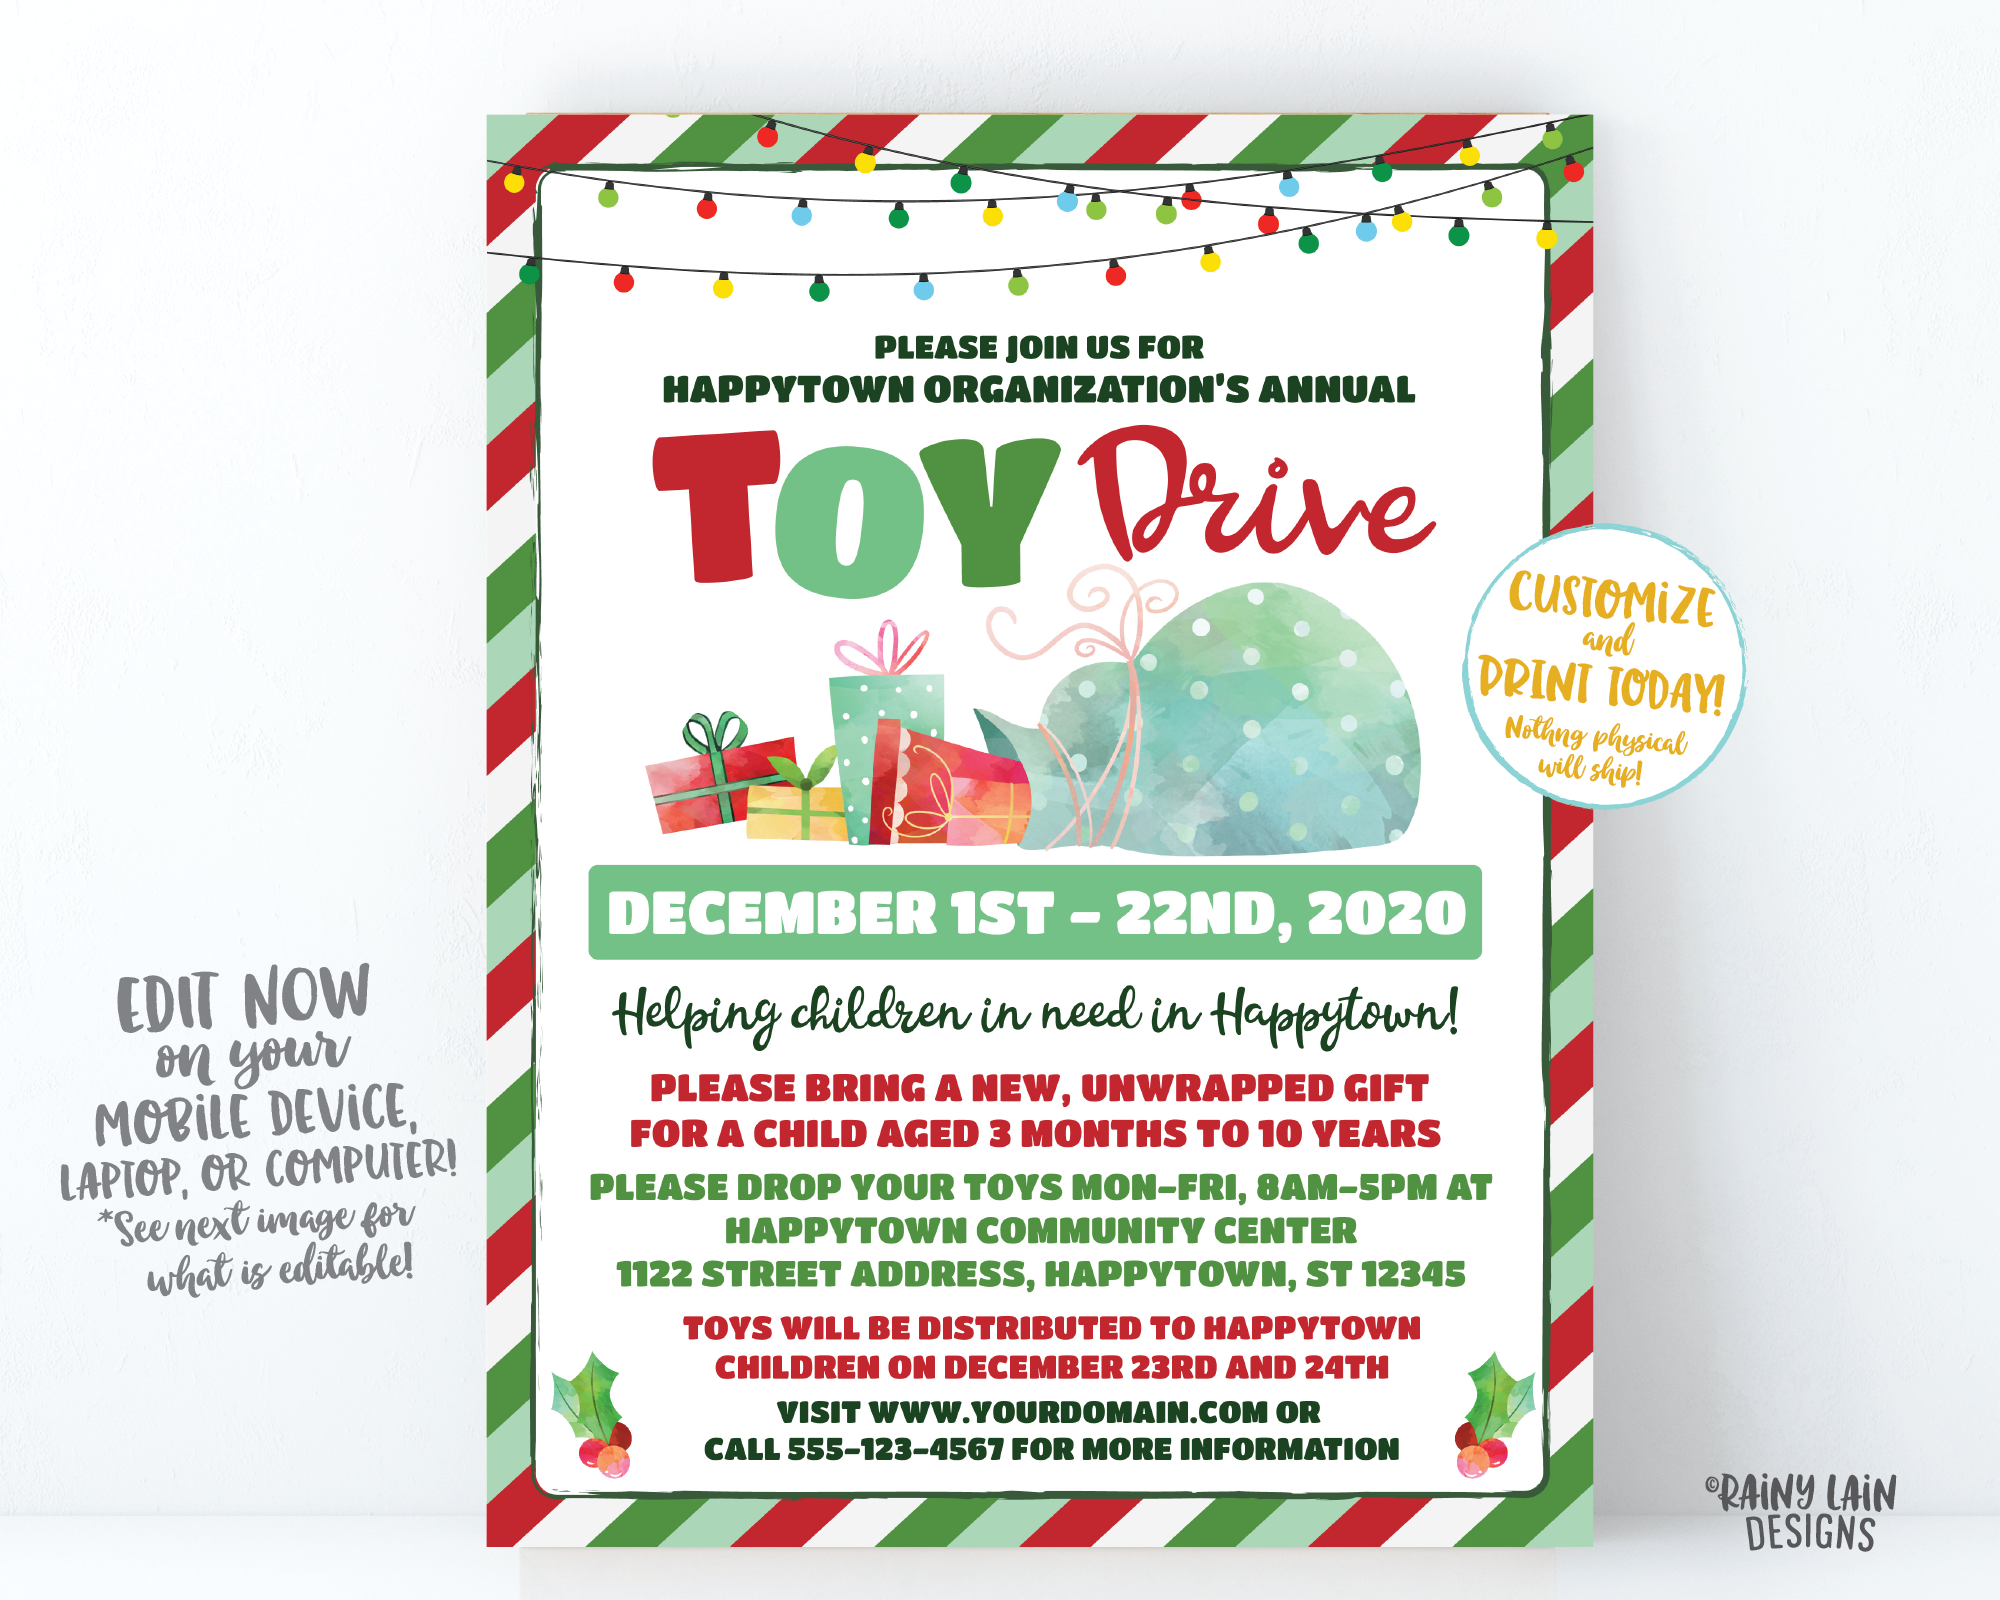 Toy Drive Flyer, Christmas Toy Drive Flyer, Holiday Toy Drive Flier Fundraiser Invitation Information Card Digital Flyer Editable DIY